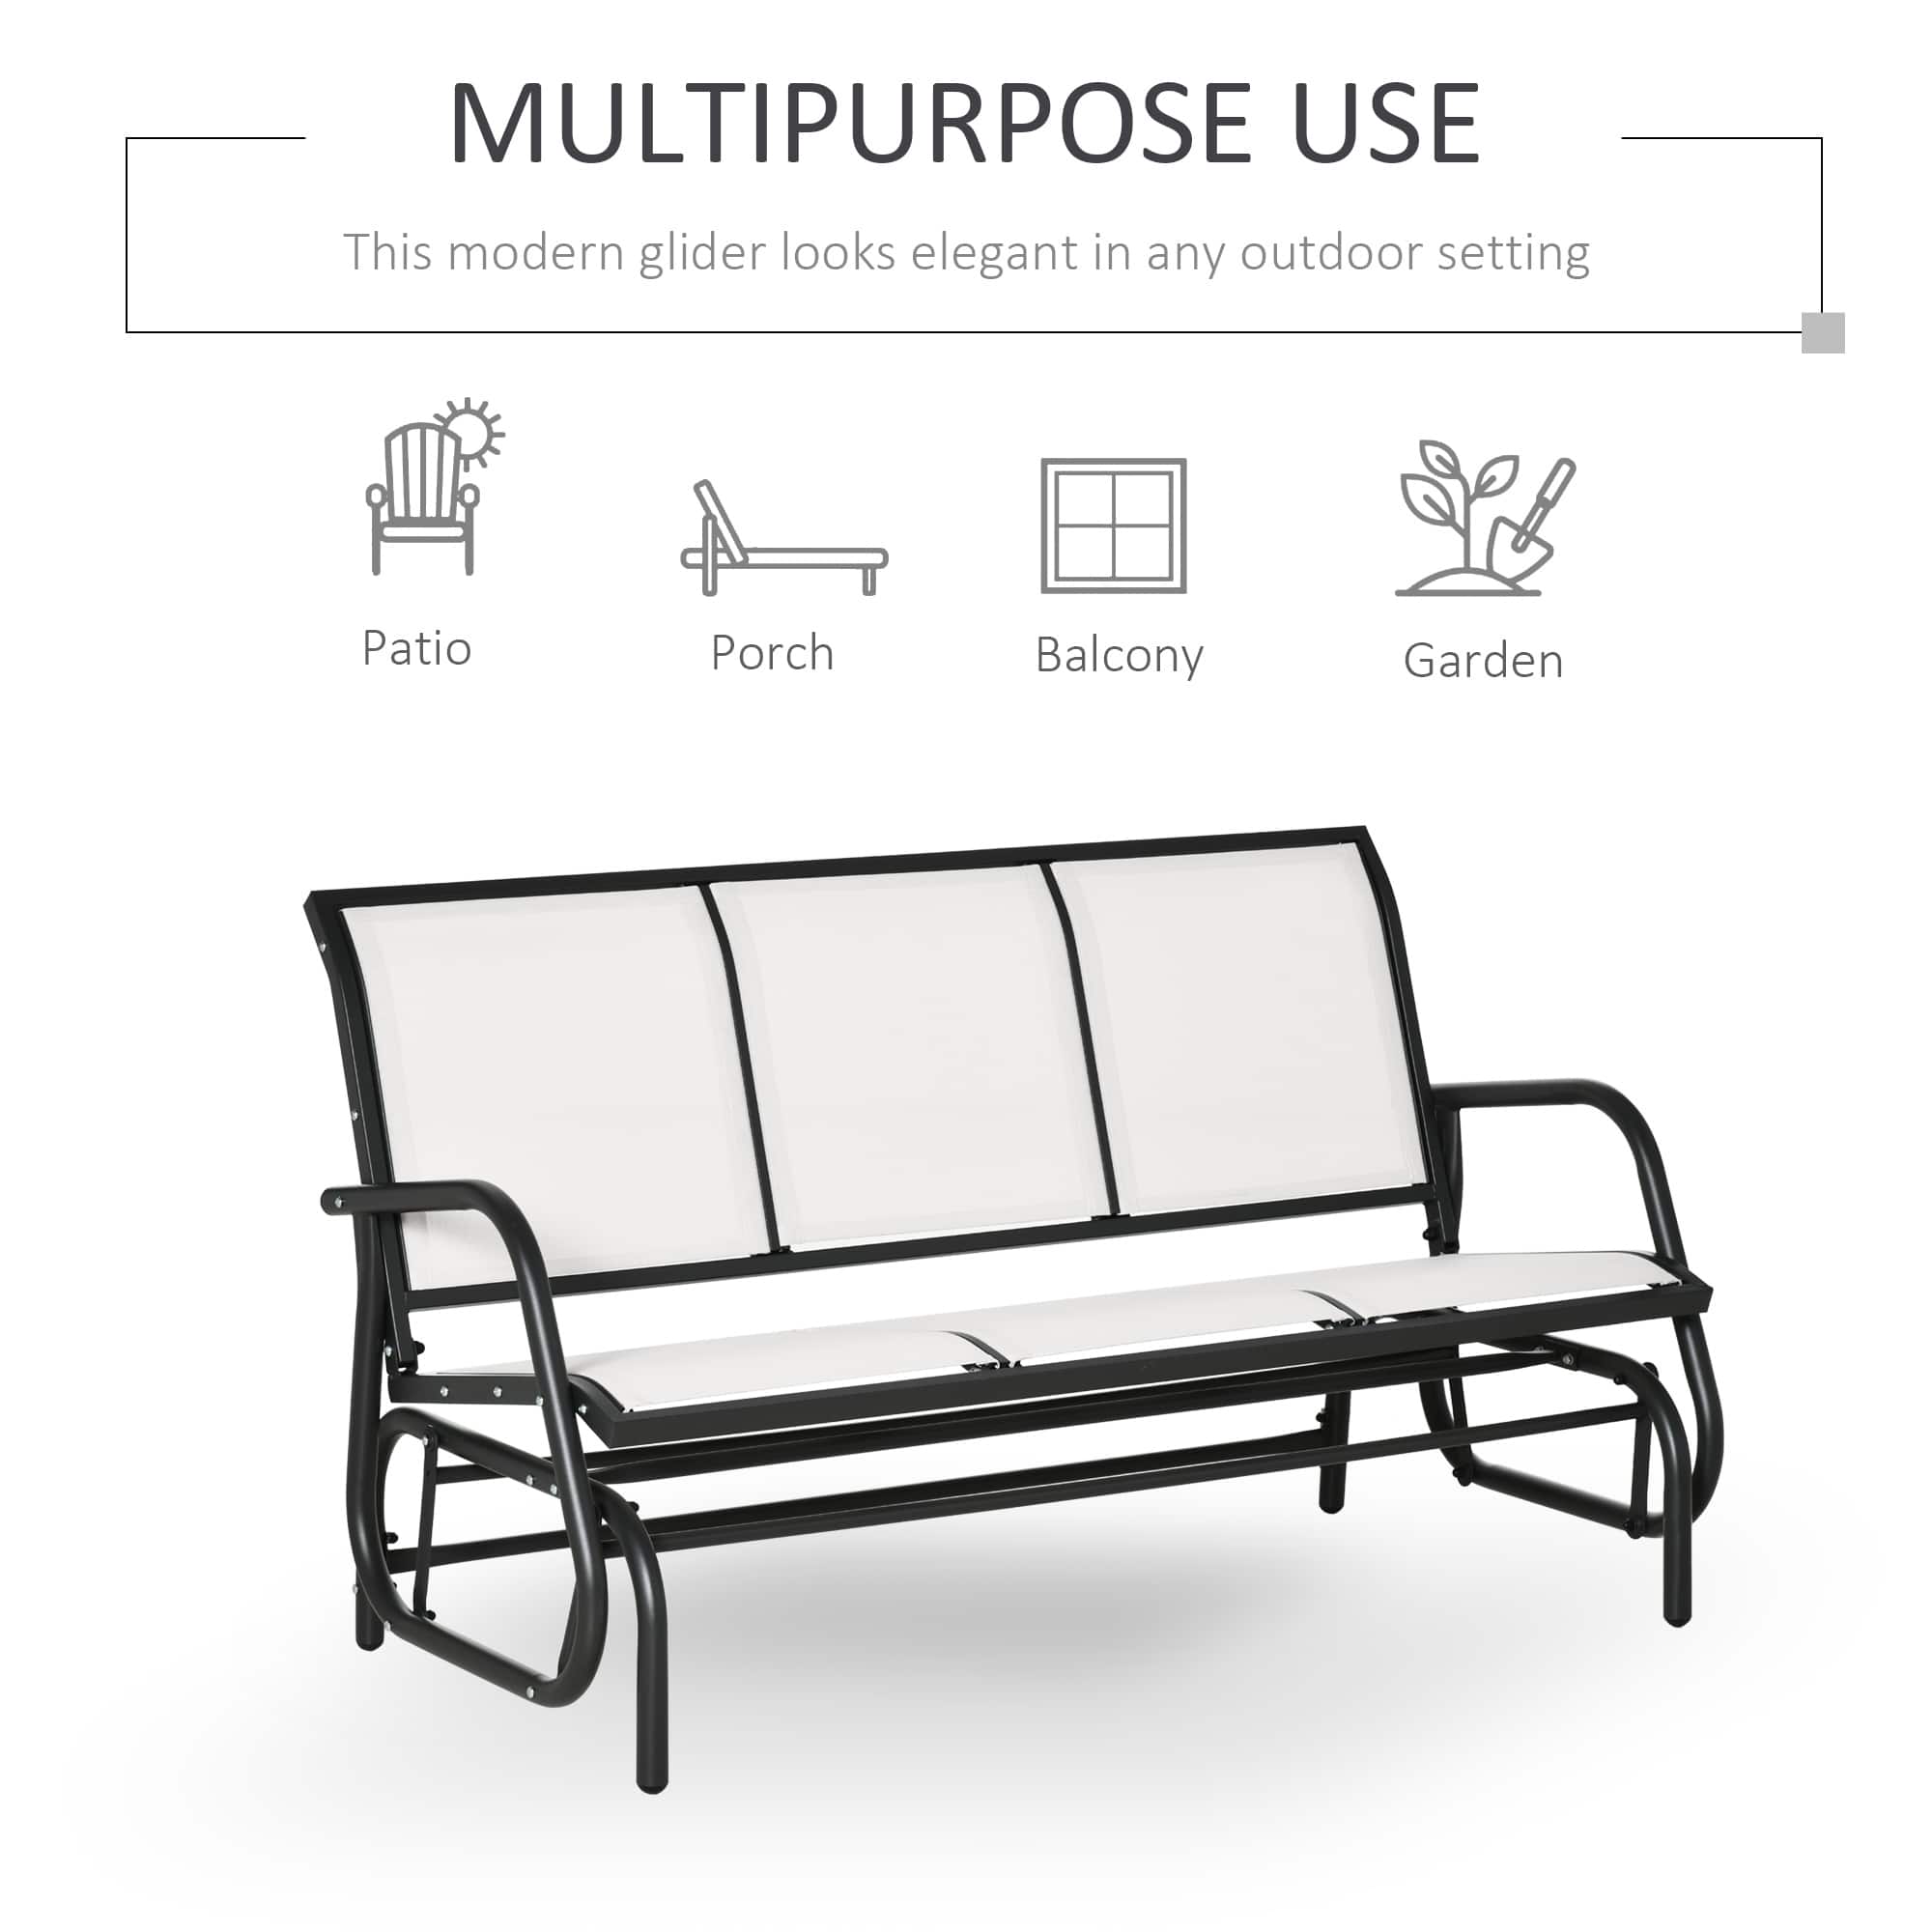 Outsunny 3-Person Patio Glider Bench, Outdoor Porch Glider Swing with 3 ...